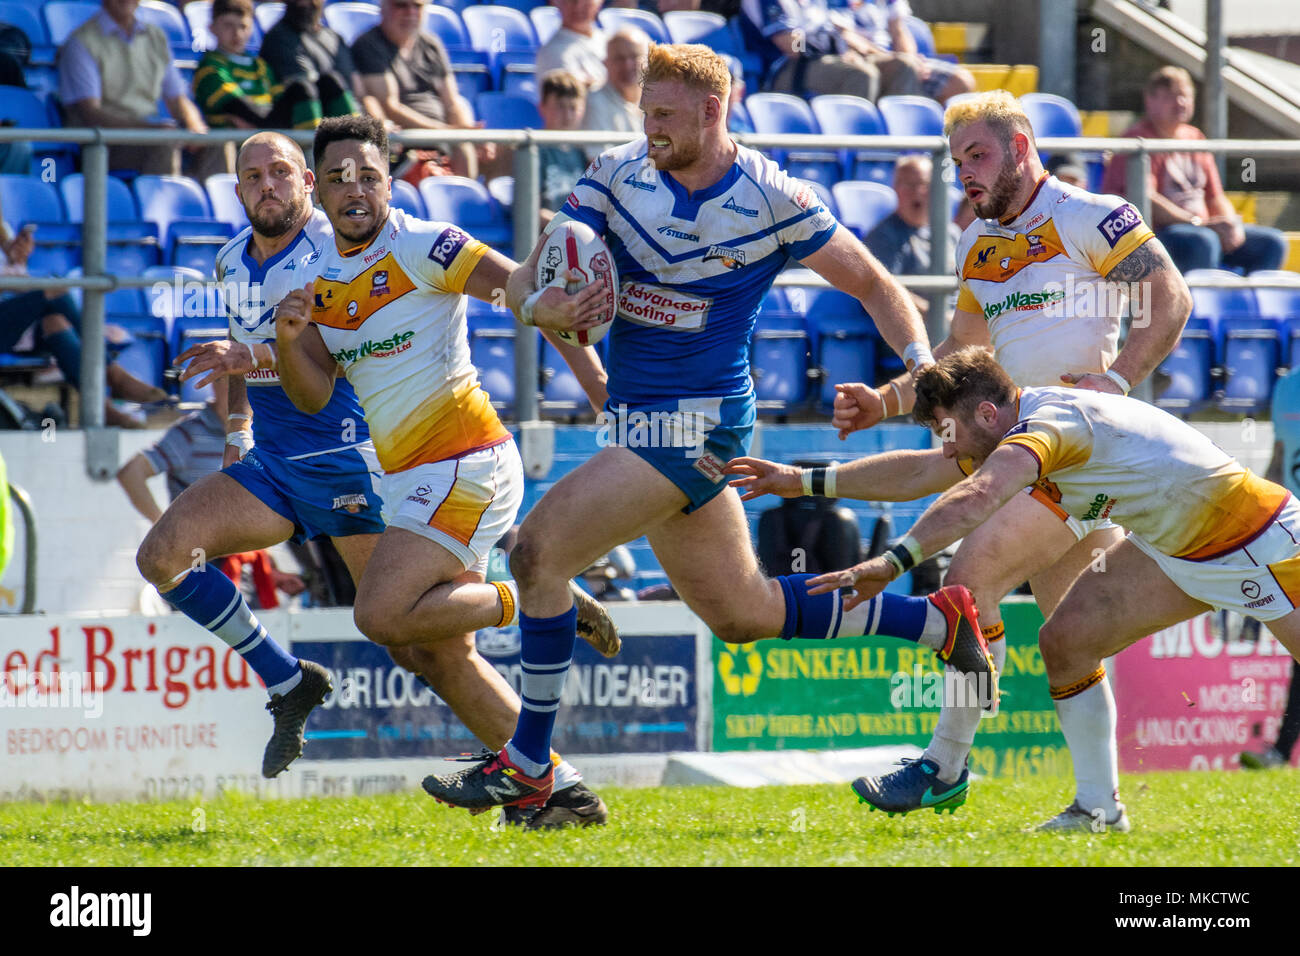 Joe Bullock playing for Barrow Raiders on his way to scoring a try against Batley Bulldogs in the Betfred Championship Stock Photo